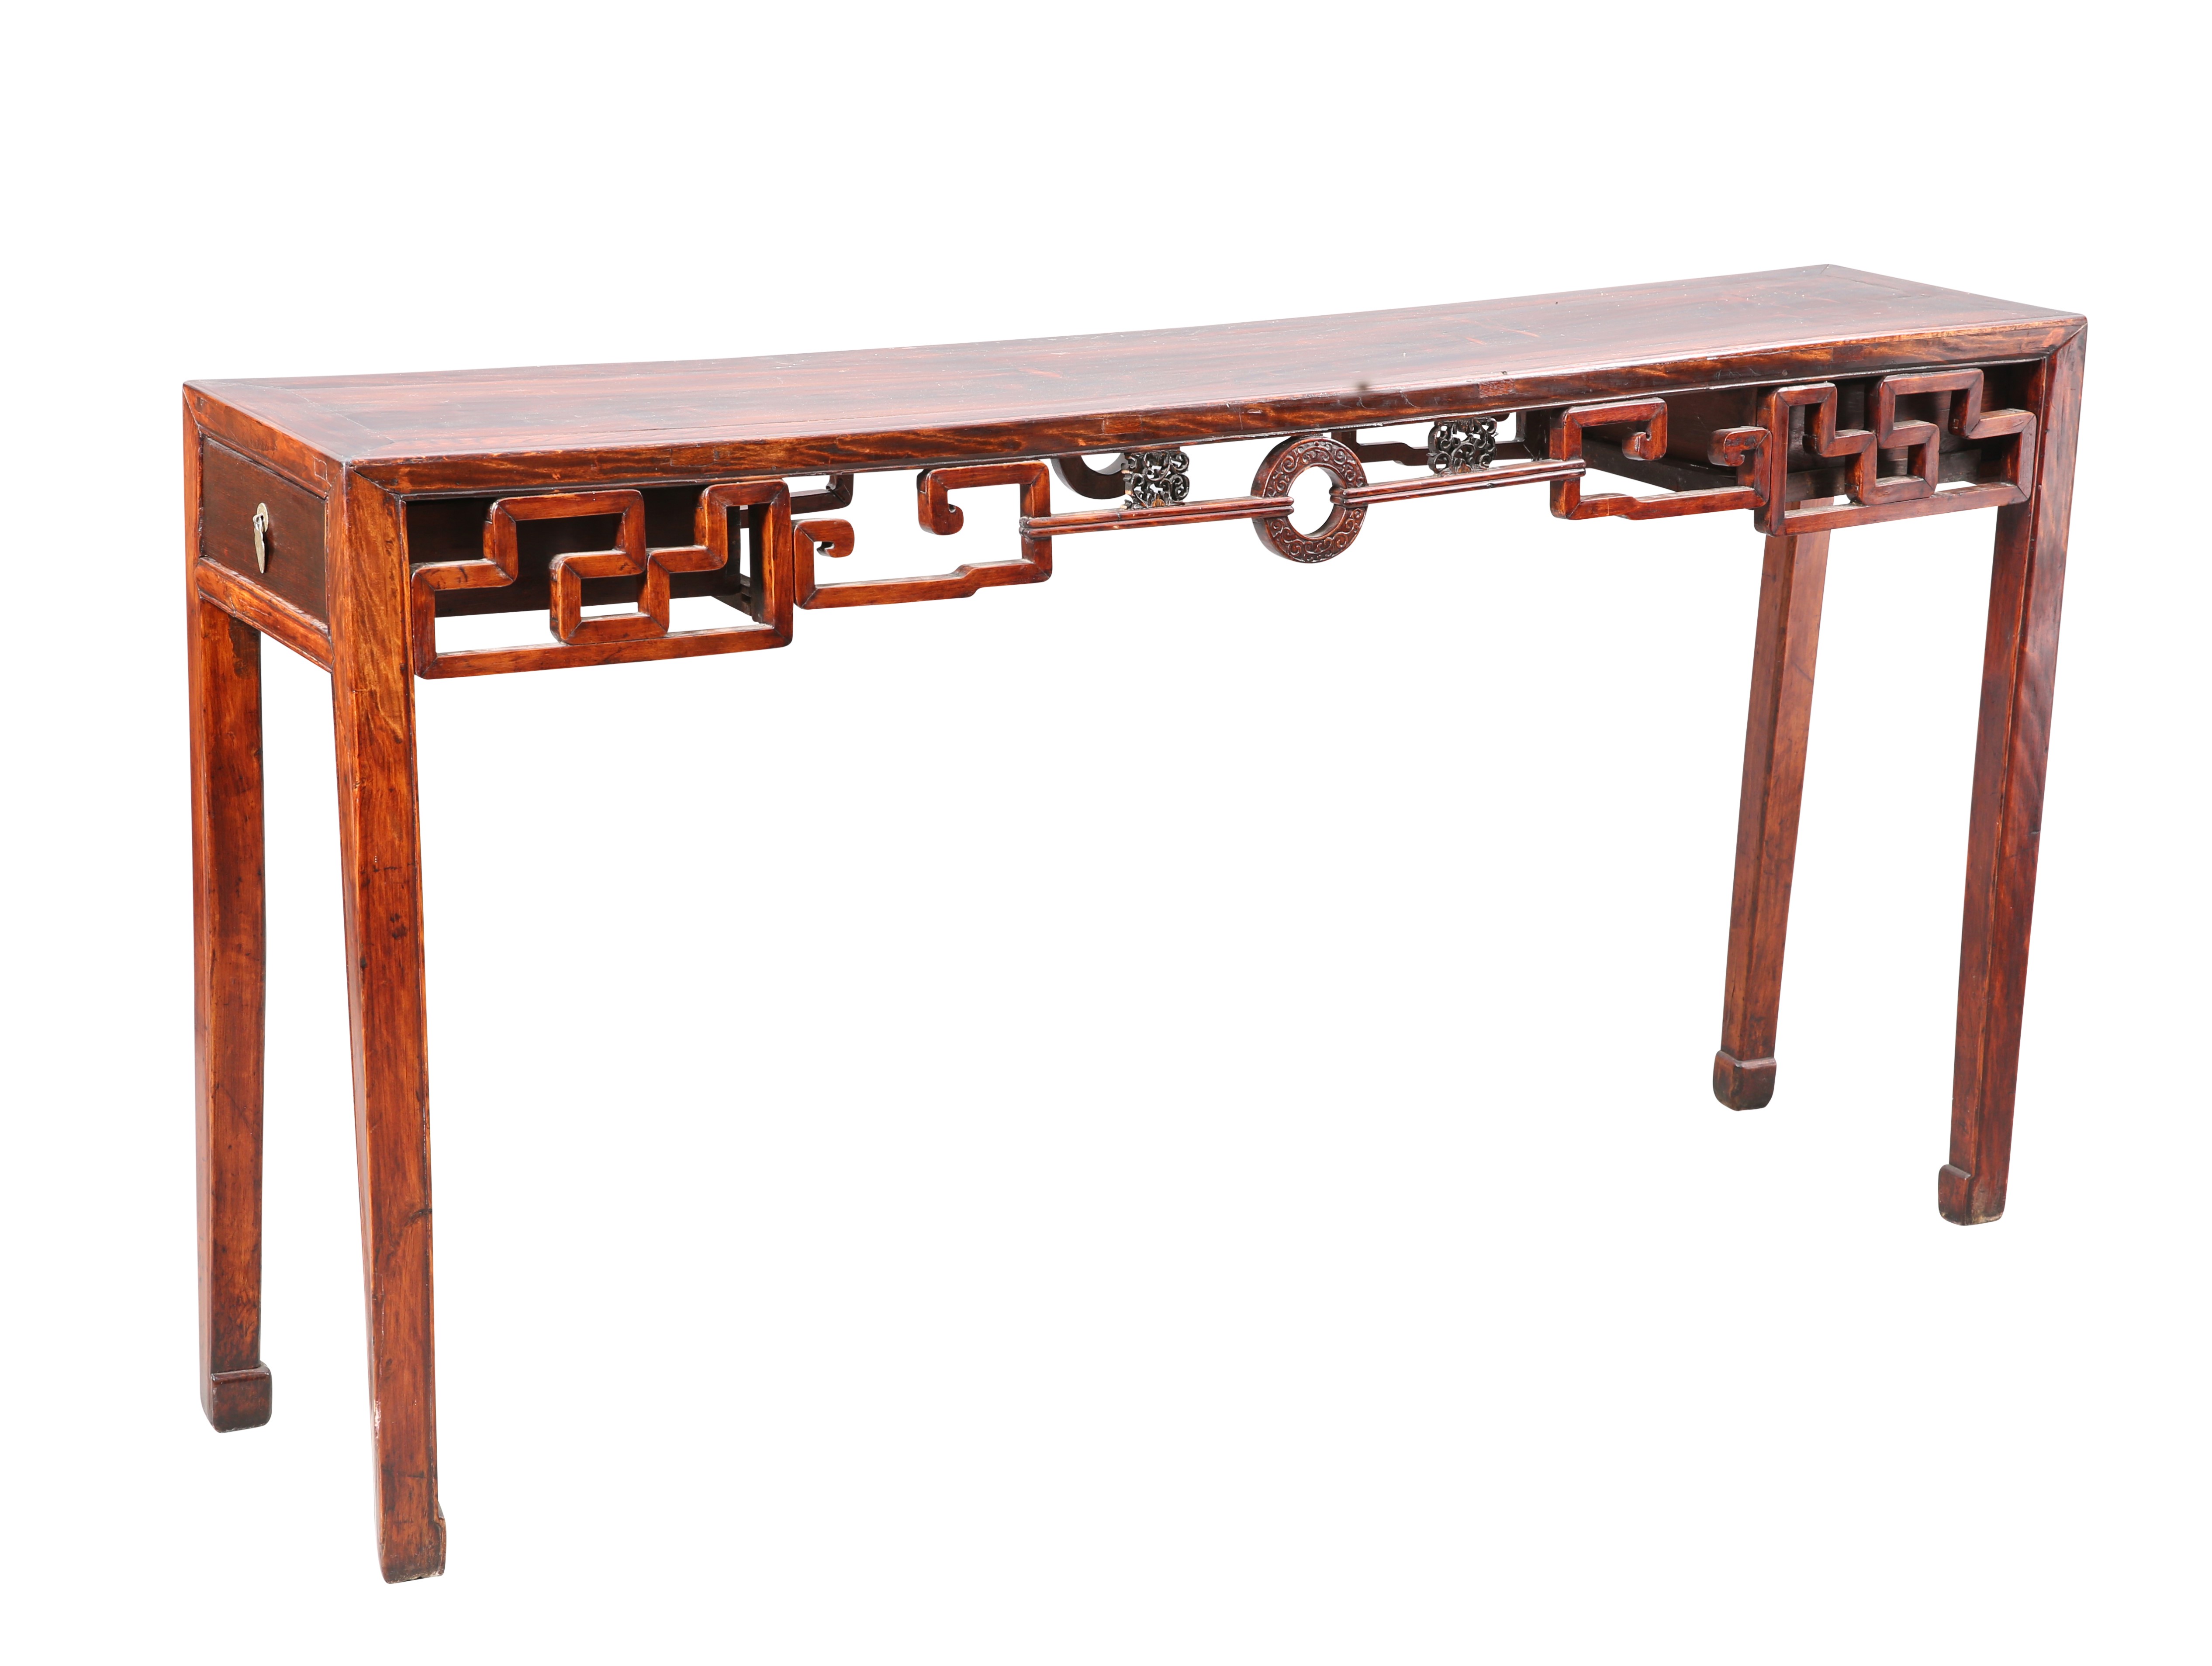 A CHINESE REDWOOD ALTAR TABLE